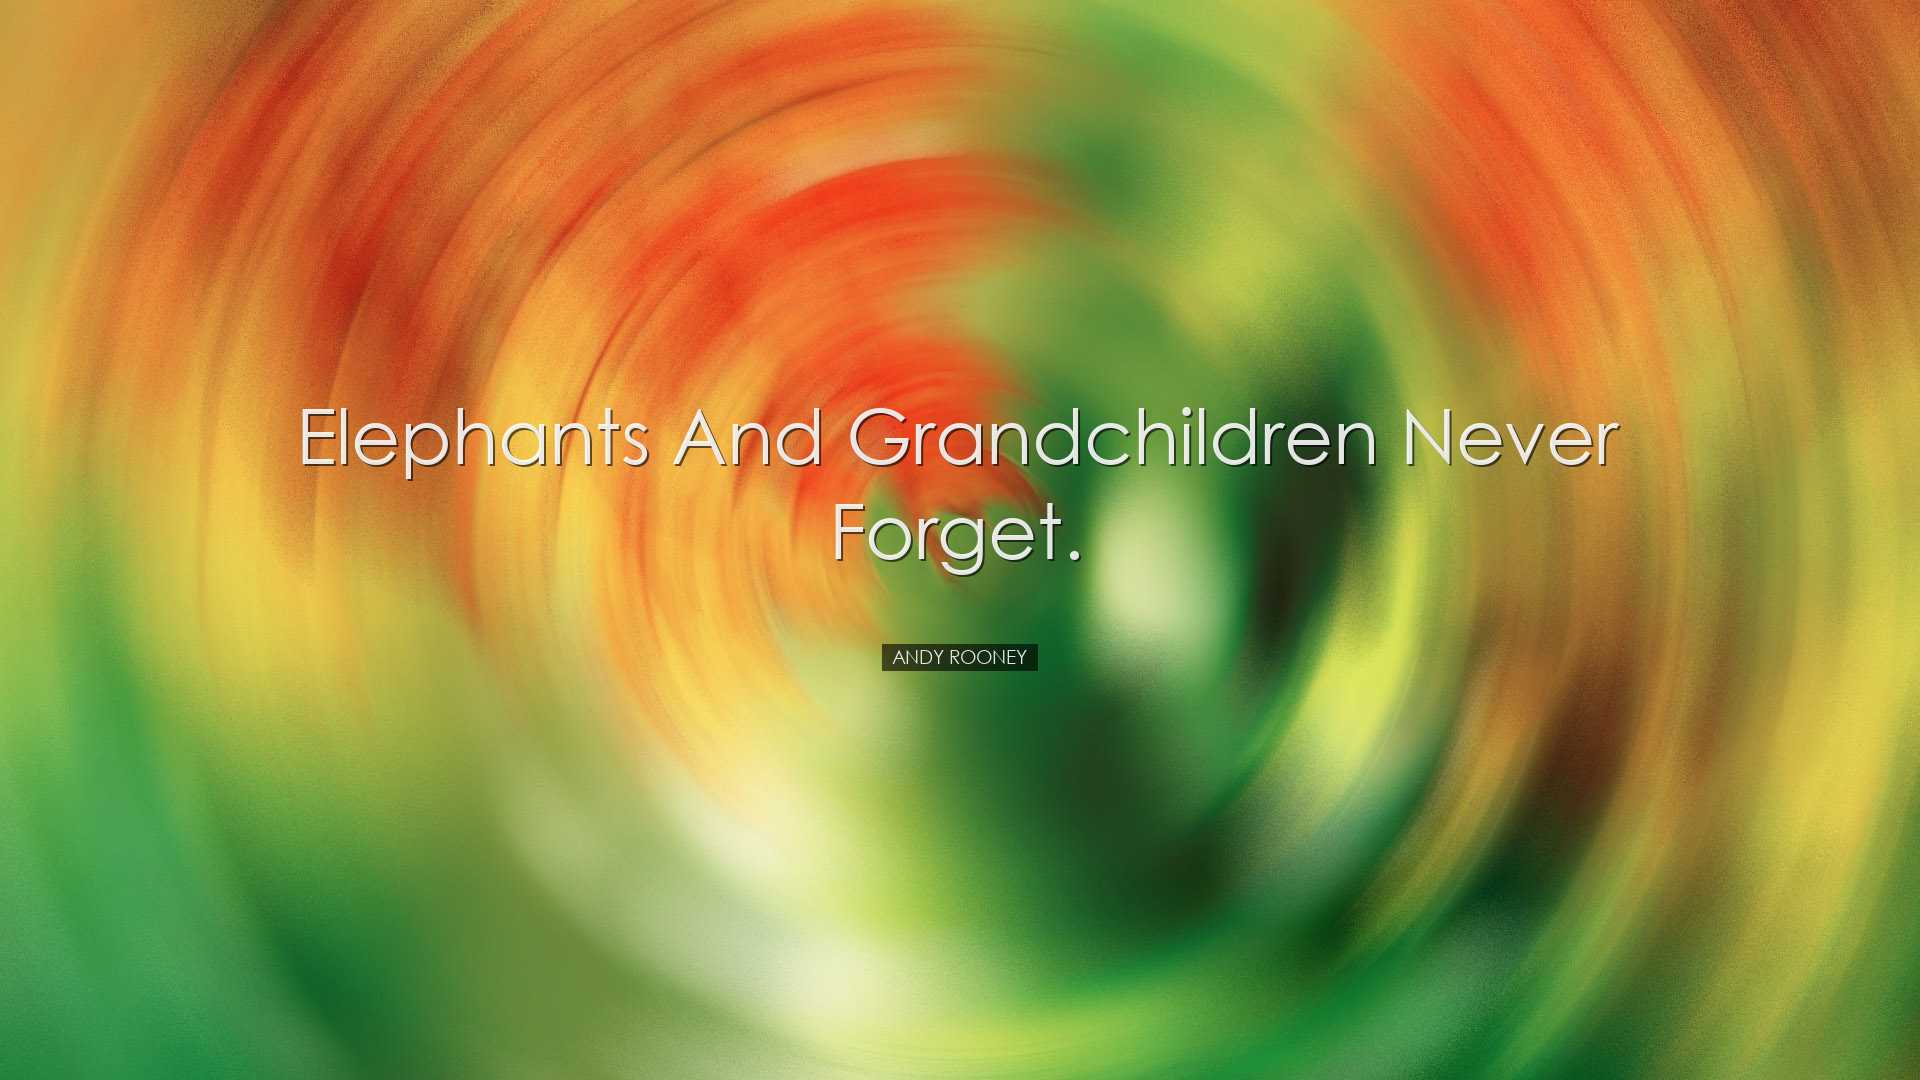 Elephants and grandchildren never forget. - Andy Rooney